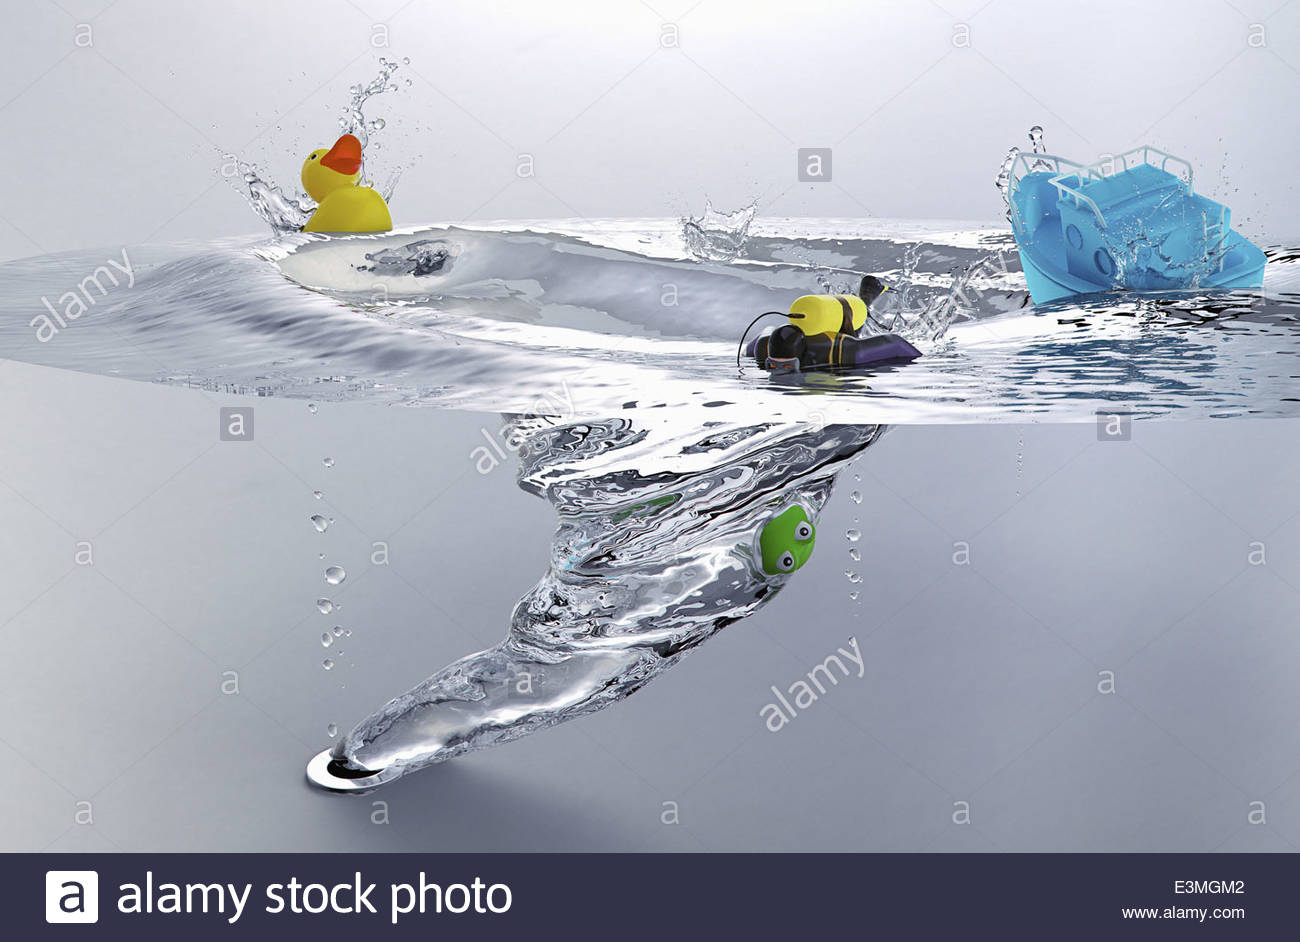 Bath Toys And Diver Sinking In Whirlpool Of Drain Plughole